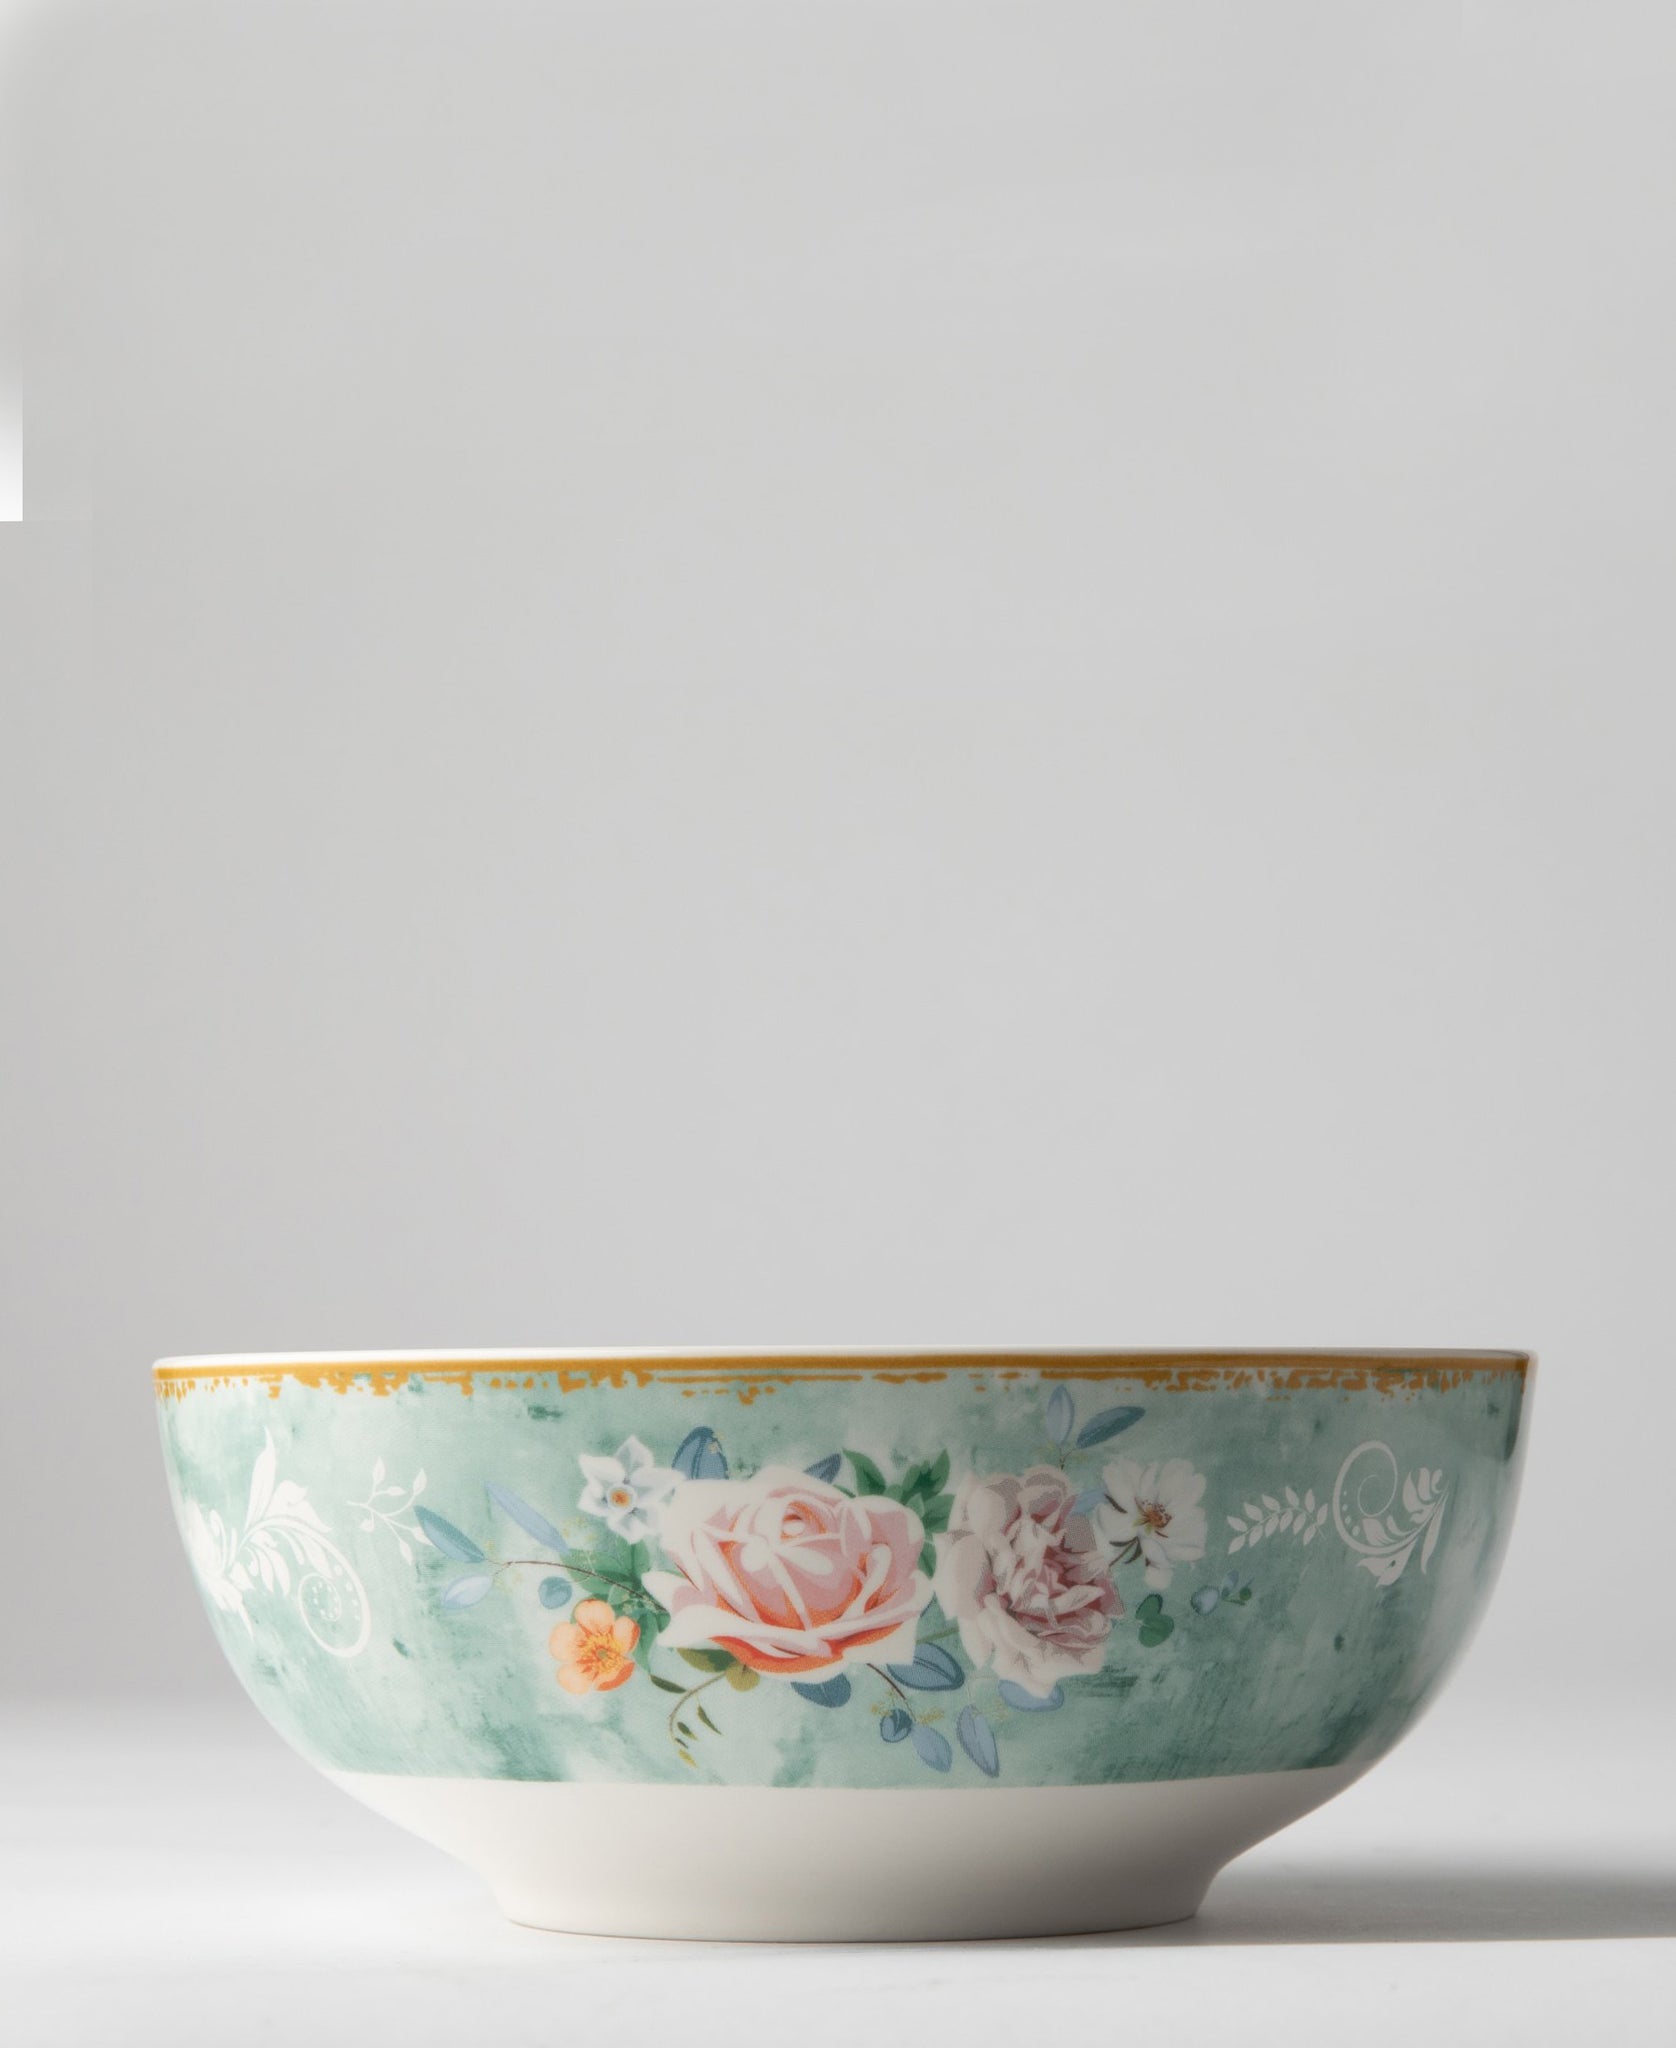 Jenna Clifford Green Floral 4 Piece Cereal Bowl Set - White